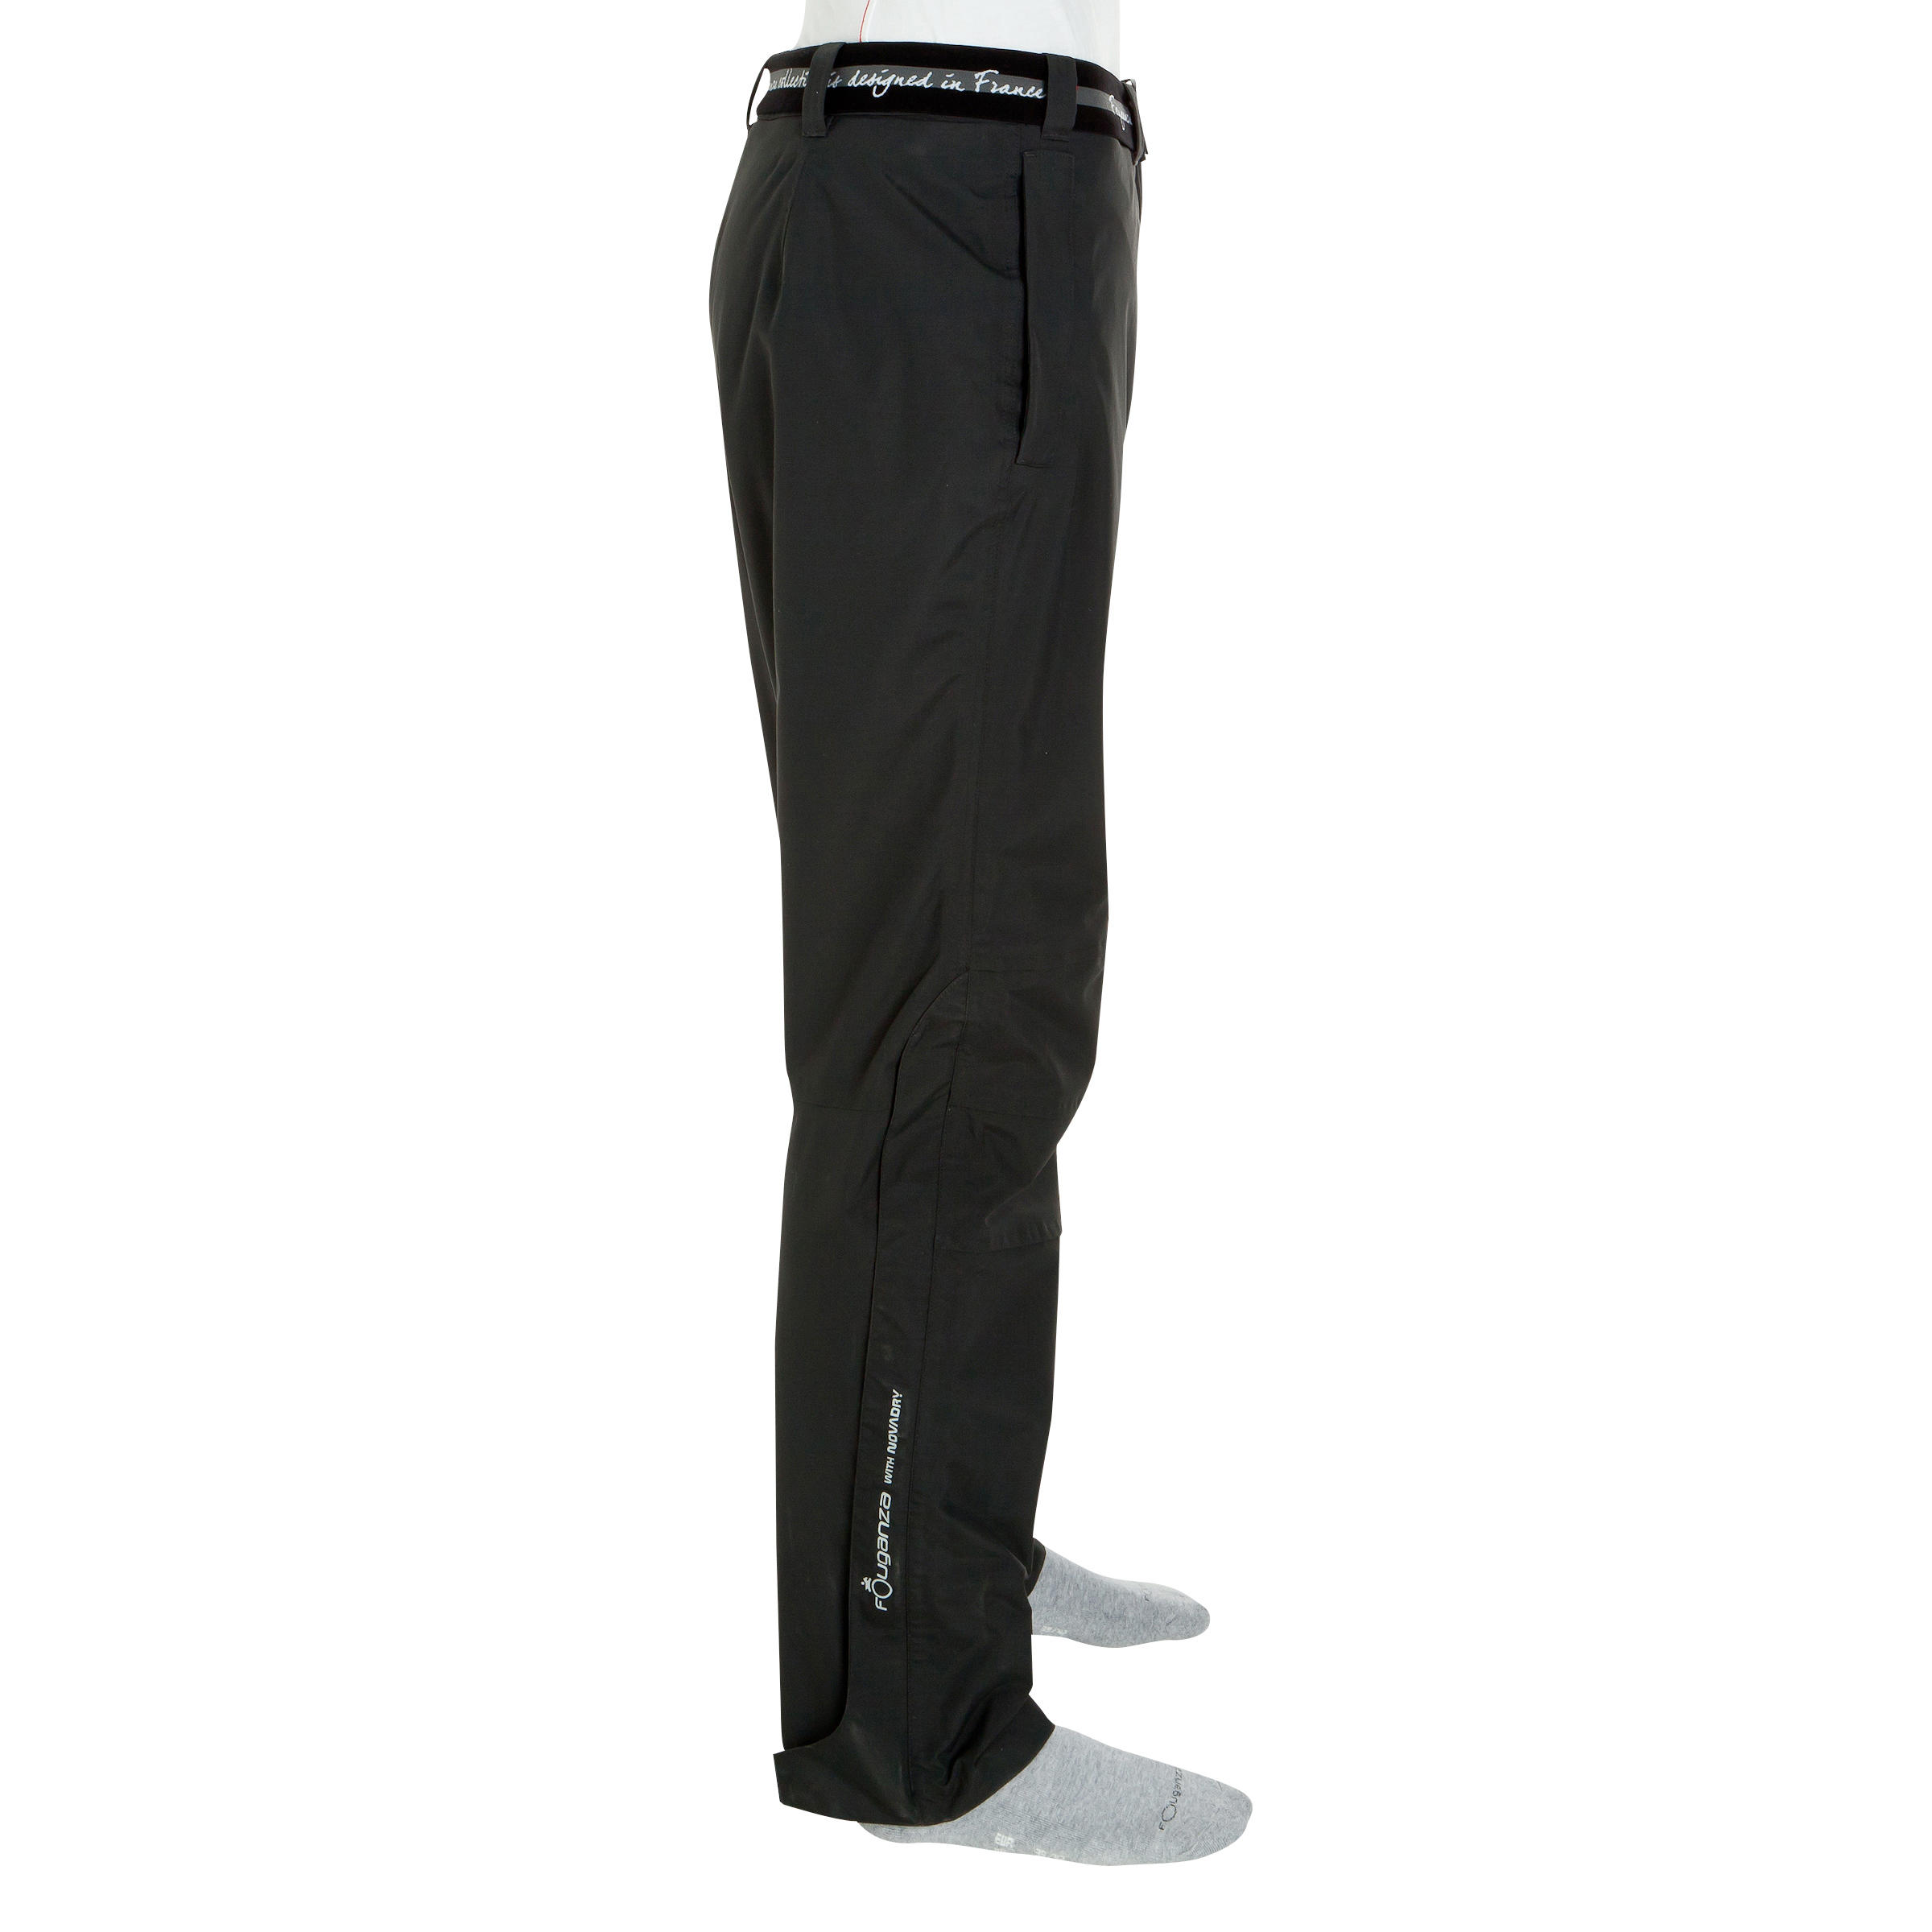 500 Adult 2-in1 Waterproof Horse Riding Overtrousers - Black 2/14